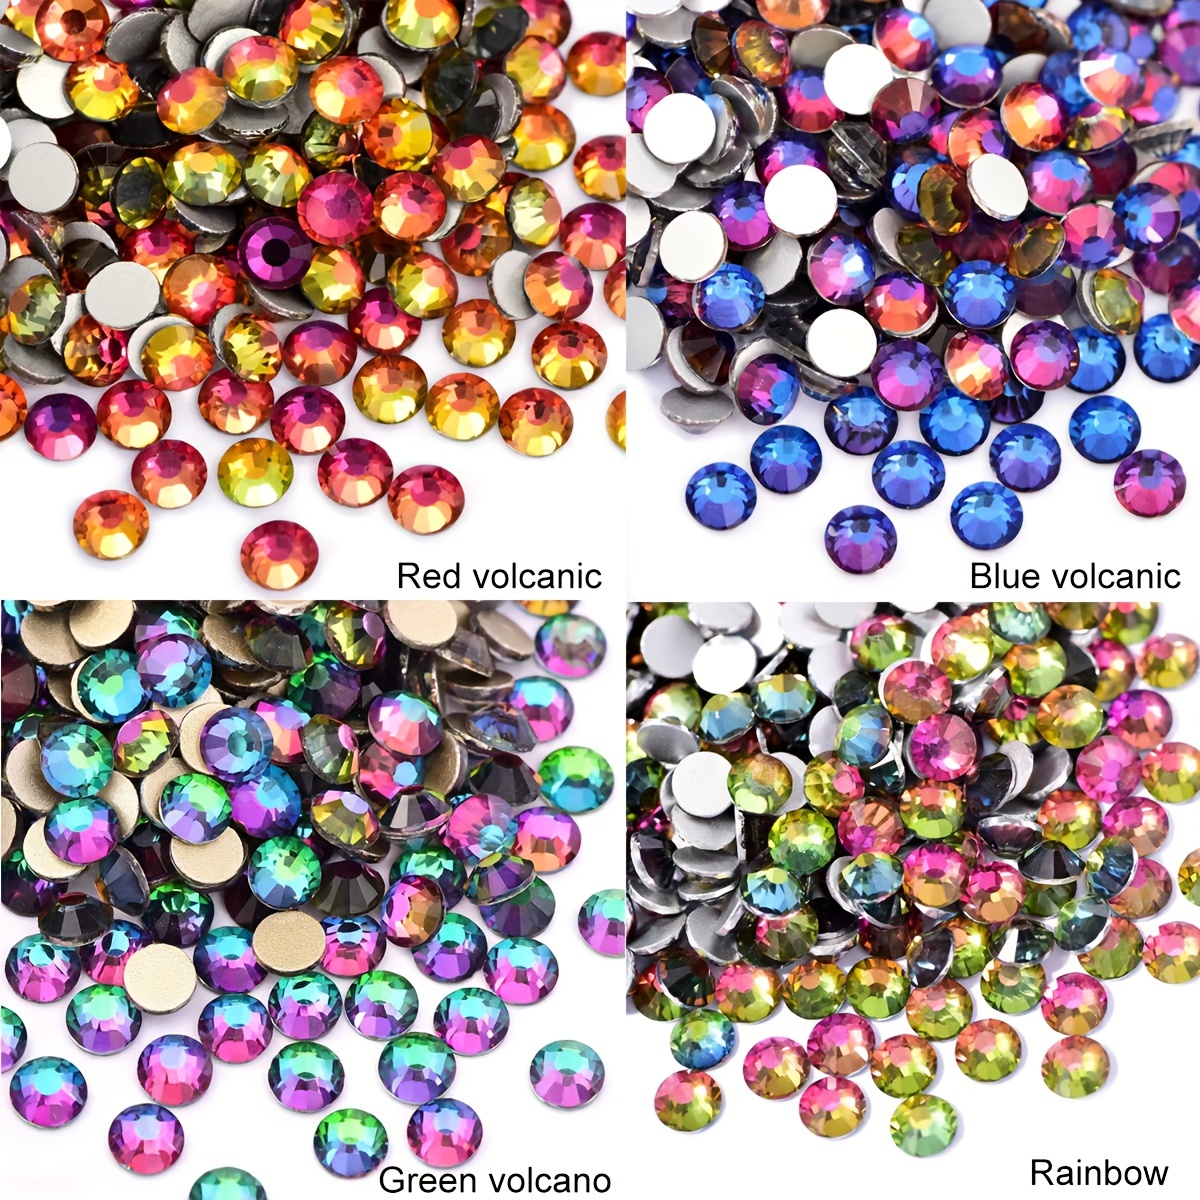 SaPeal Self-Adhesive Rhinestone Sticker Bling Craft Jewels Crystal Gem  Stickers, Assorted Size, 5 Sheets (Multicolor 1)